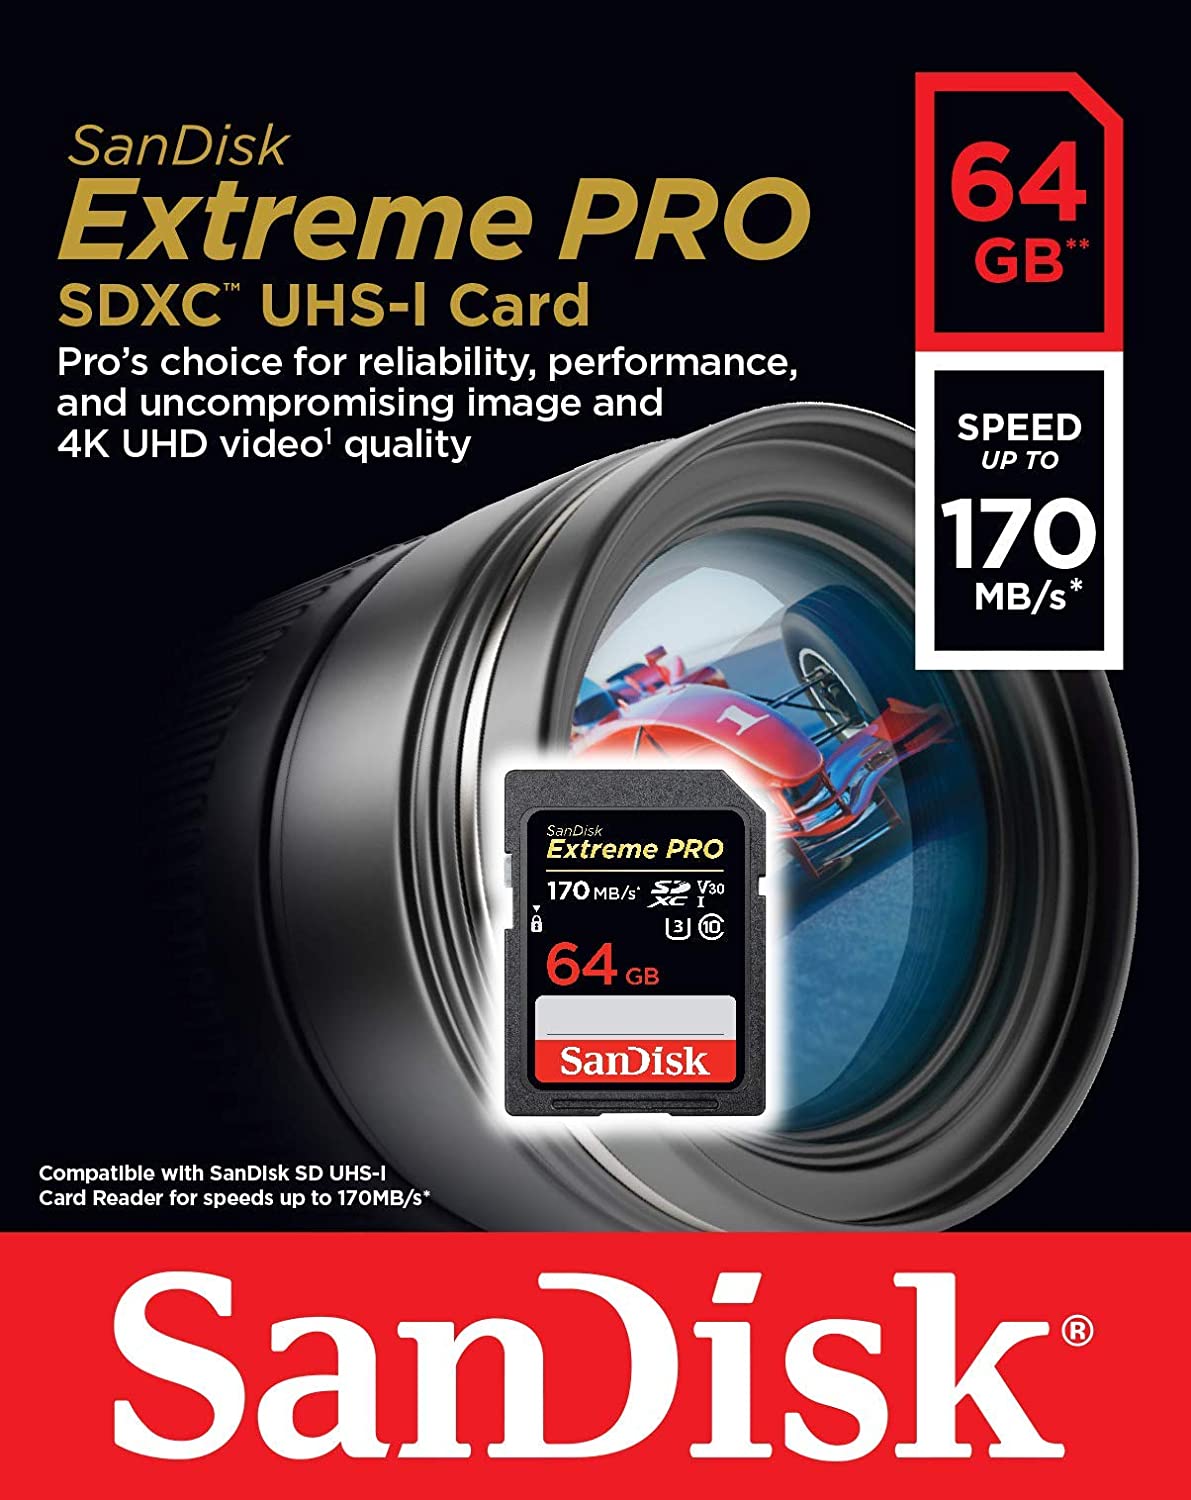 SanDisk Extreme Pro Memory Card, 64GB, SDHC-SDXC, 200MB, SDSDXXU-064G-GN4IN